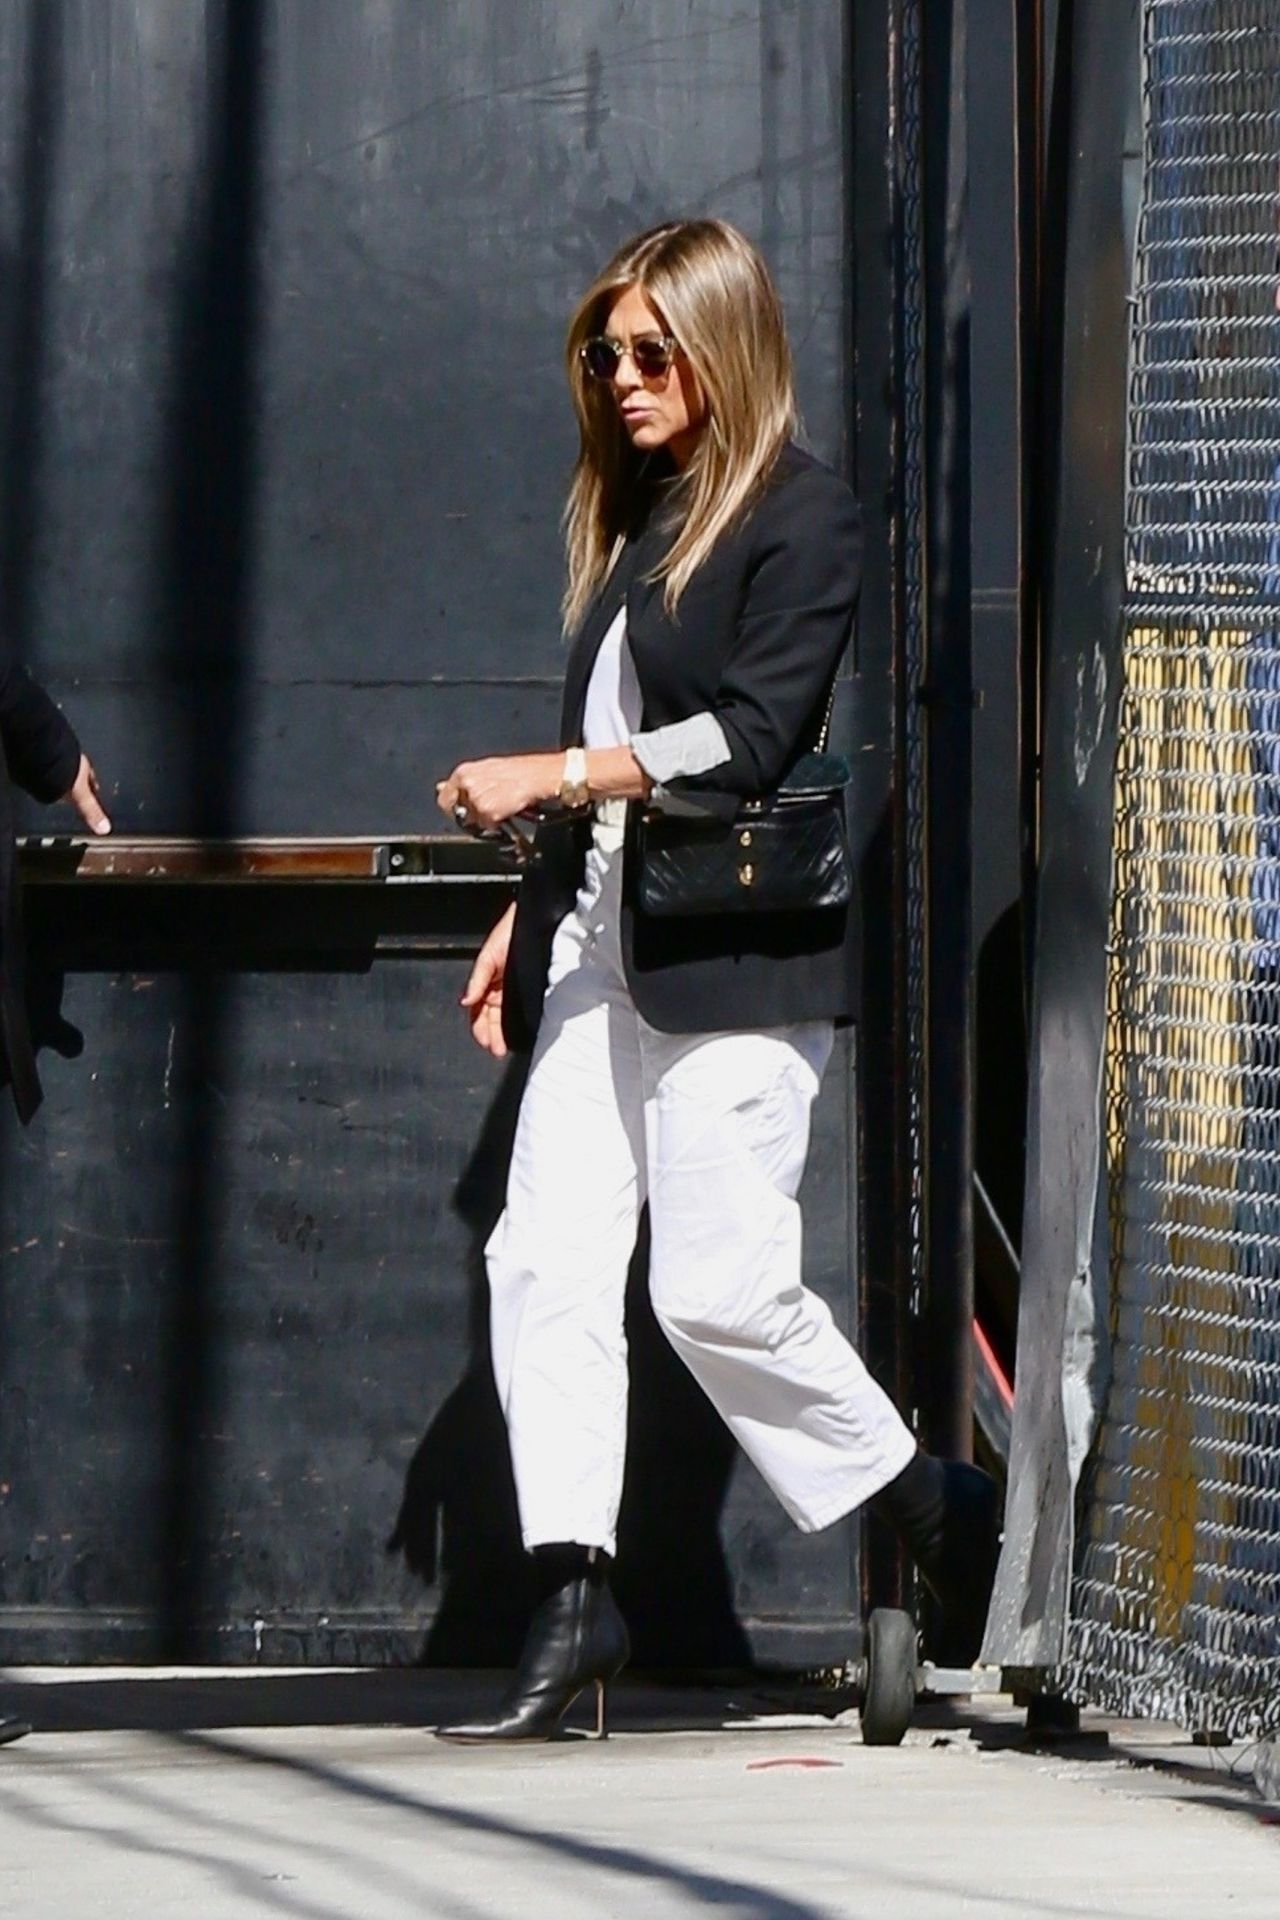 jennifer-aniston-arriving-to-appear-on-jimmy-kimmel-live-in-hollywood-05-29-2019-5.jpg